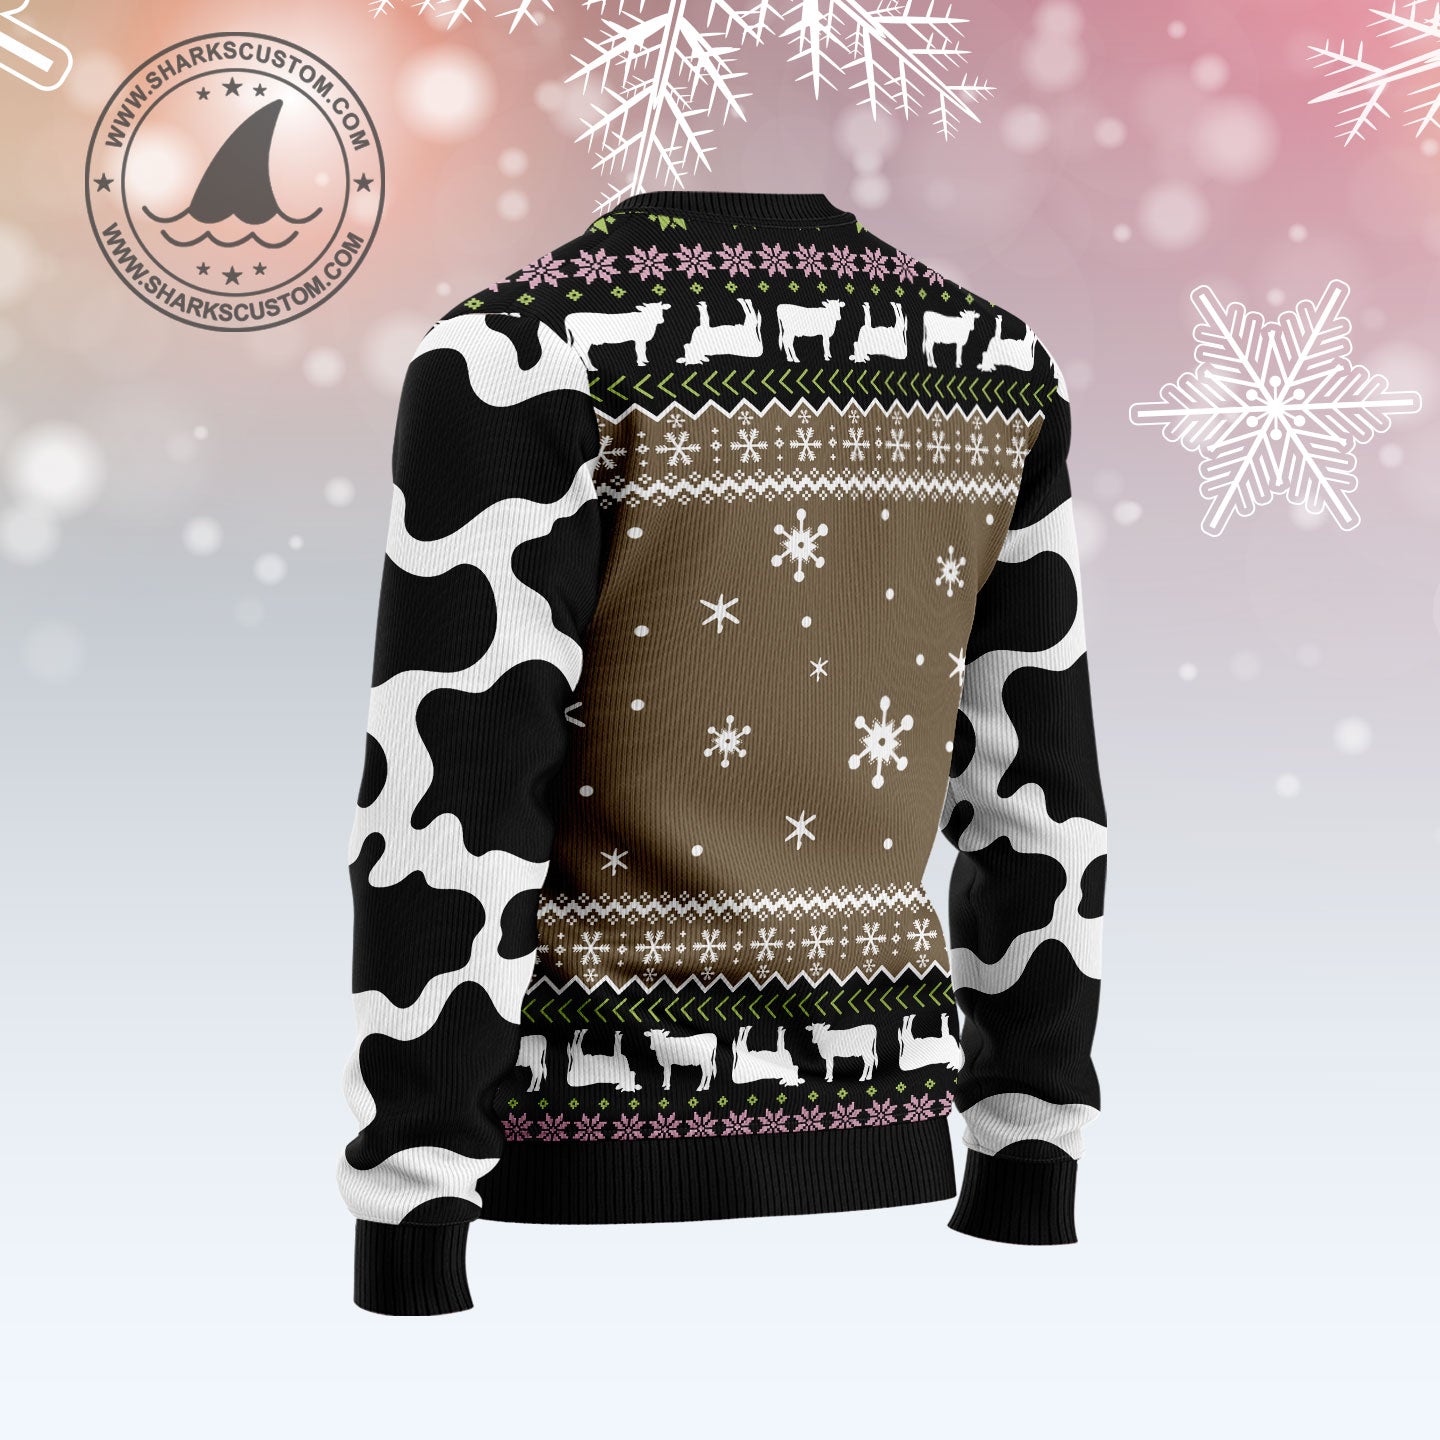 The Crazy Heifer G5114 Ugly Christmas Sweater